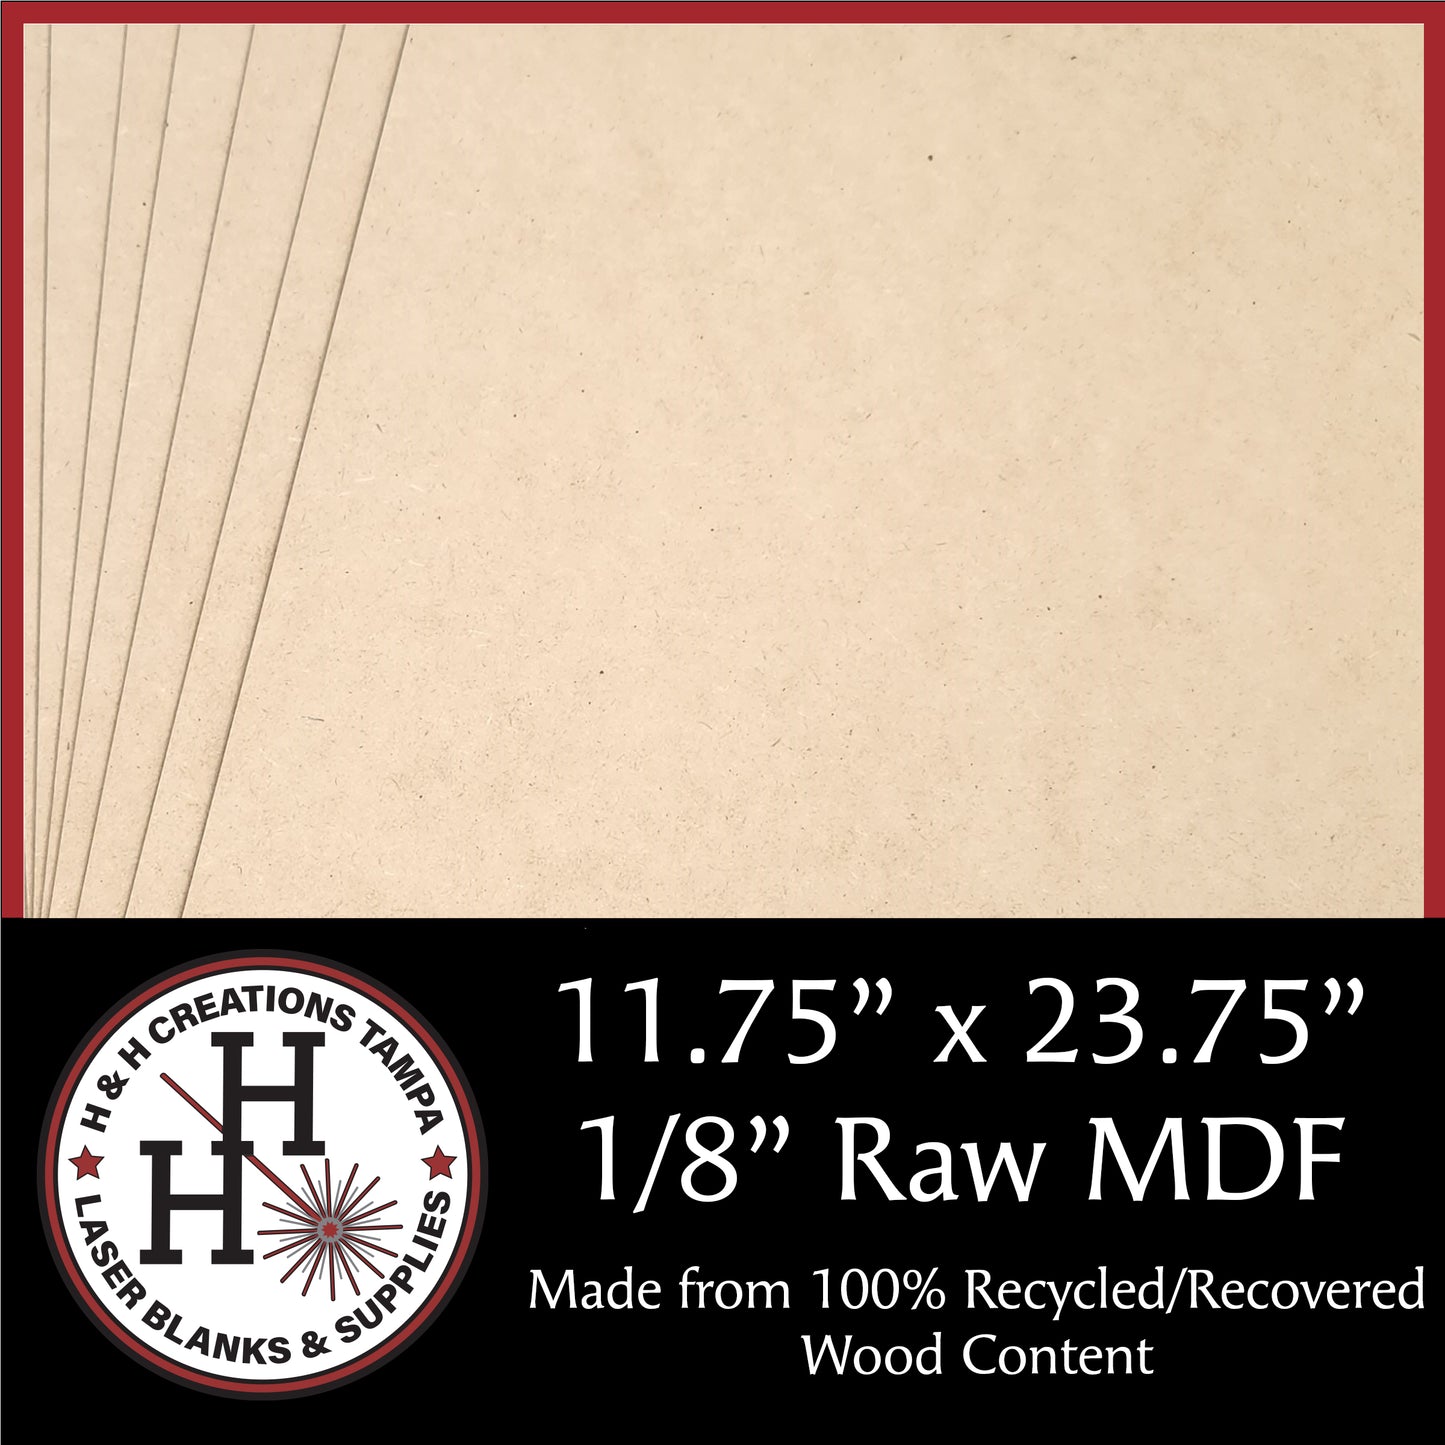 LOCAL PICK UP ONLY - 1/8" Raw Premium MDF Draft Board - Without Slick Finish – 11.75" x 23.75"